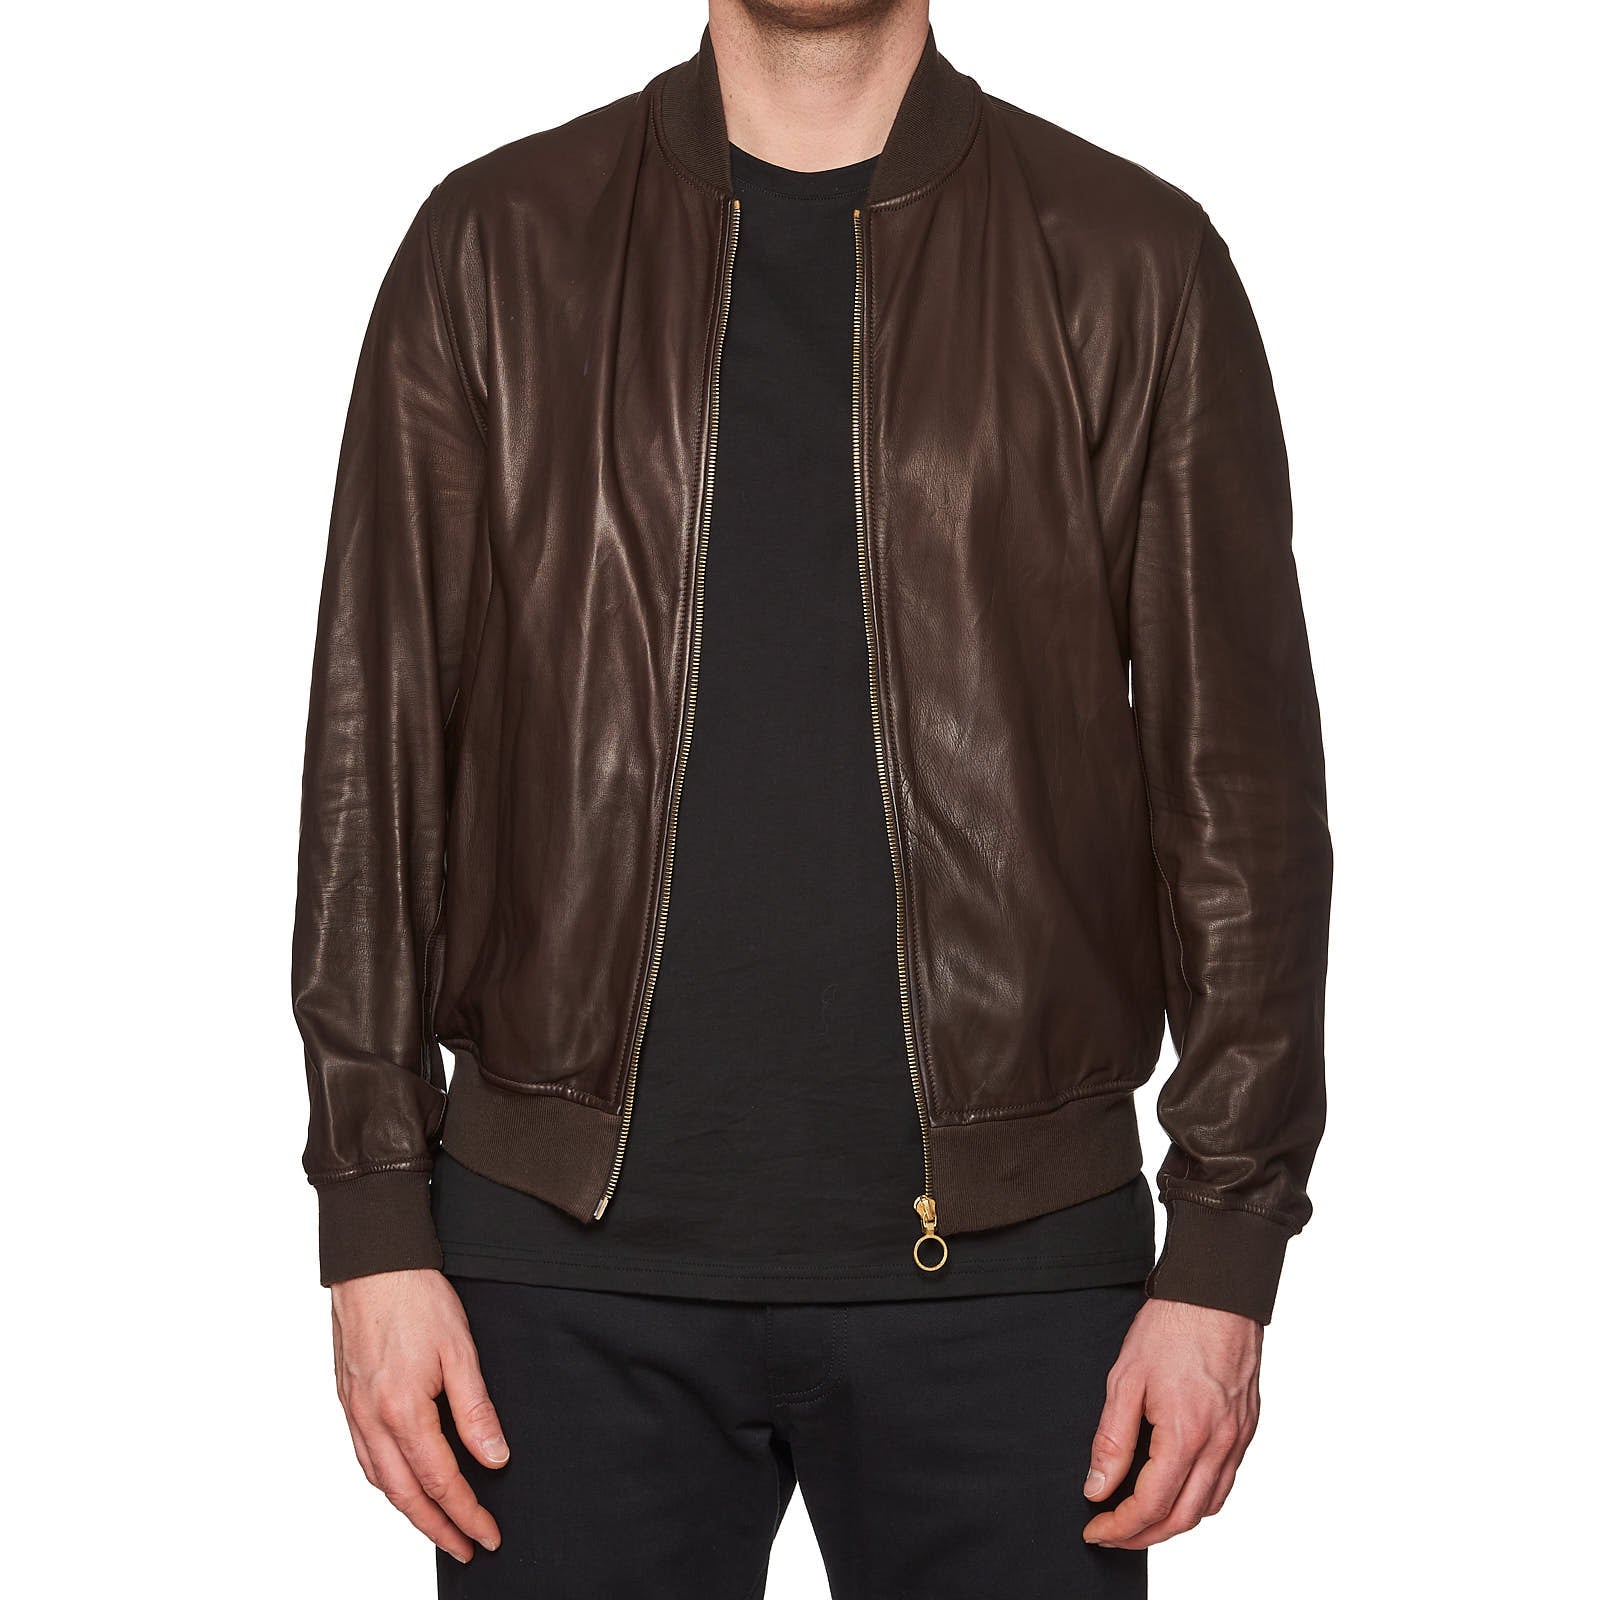 SERAPHIN Brown Lamb Leather Unlined Bomber Jacket FR 50 US M SERAPHIN